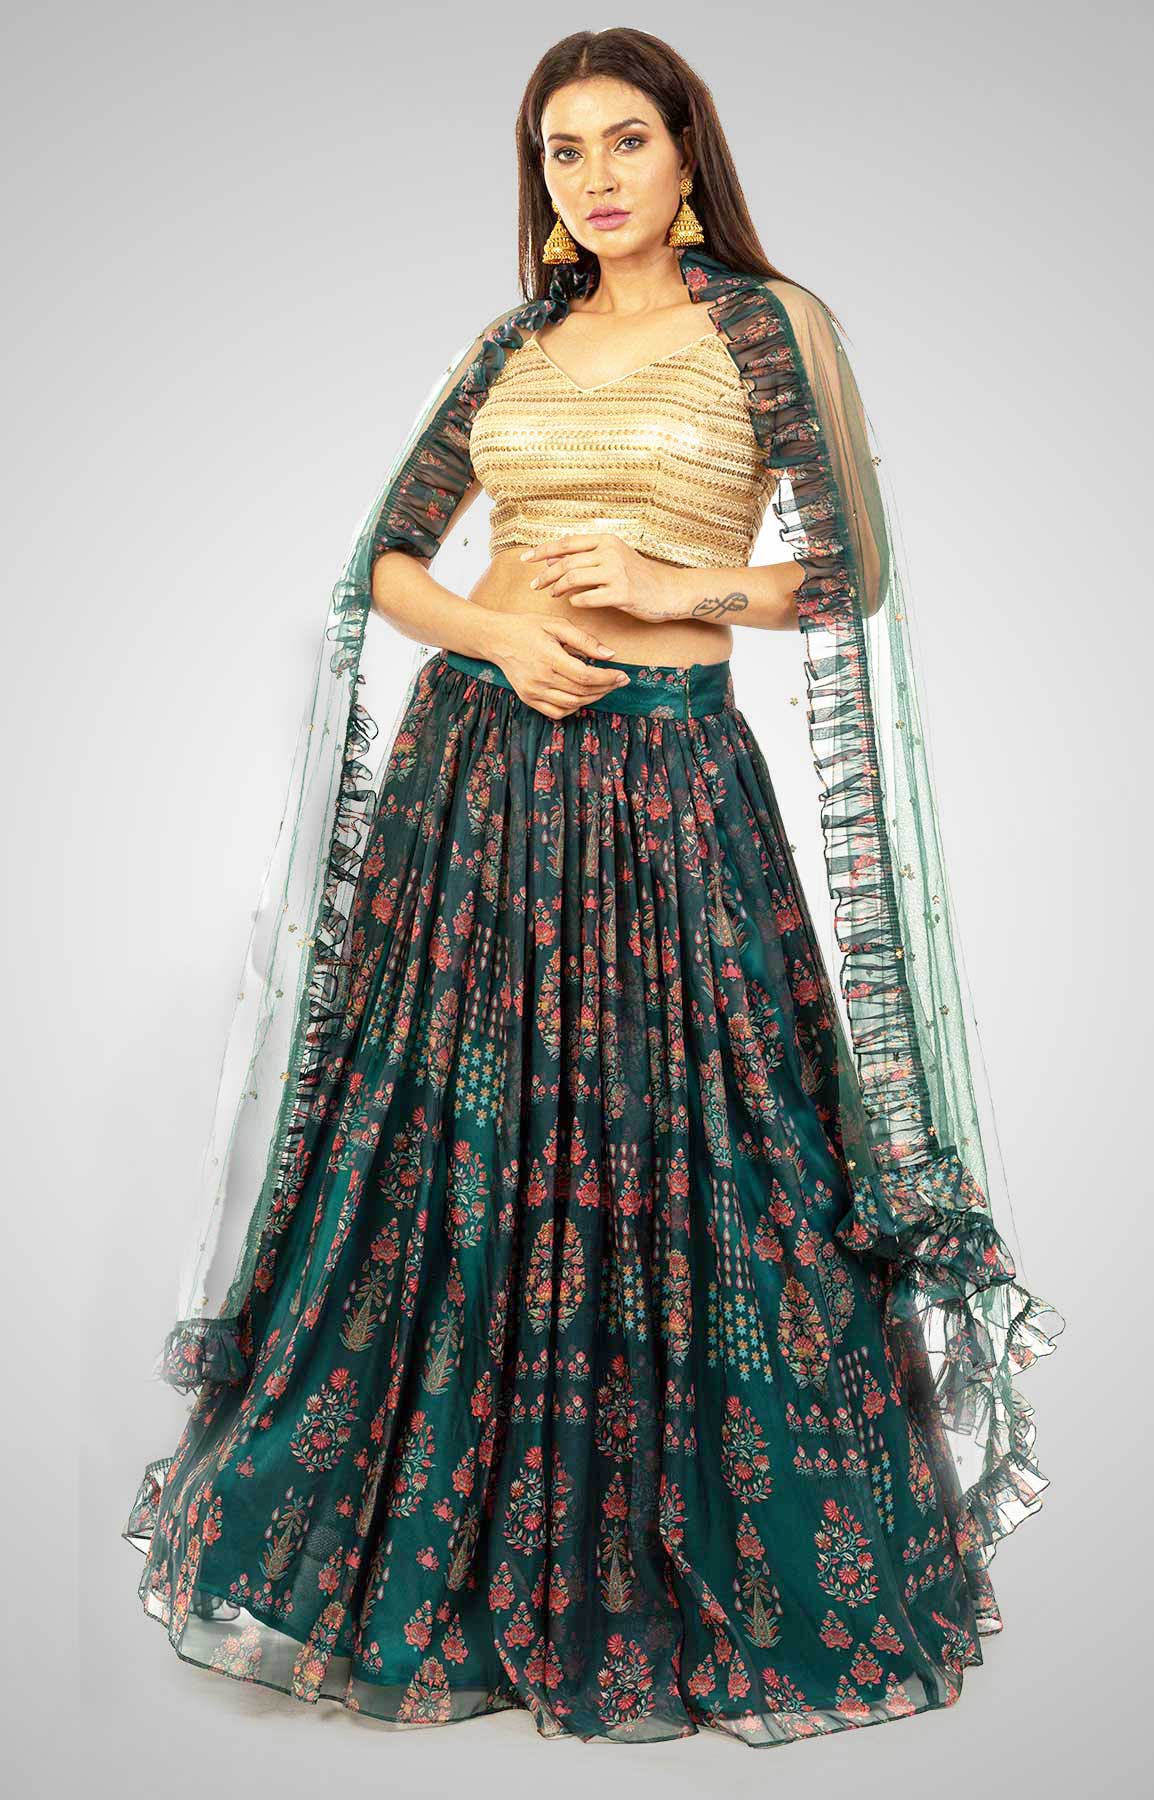 Bottle Green Floral Print Skirt With Sequin Top And Frilled Dupatta – Viraaya By Ushnakmals